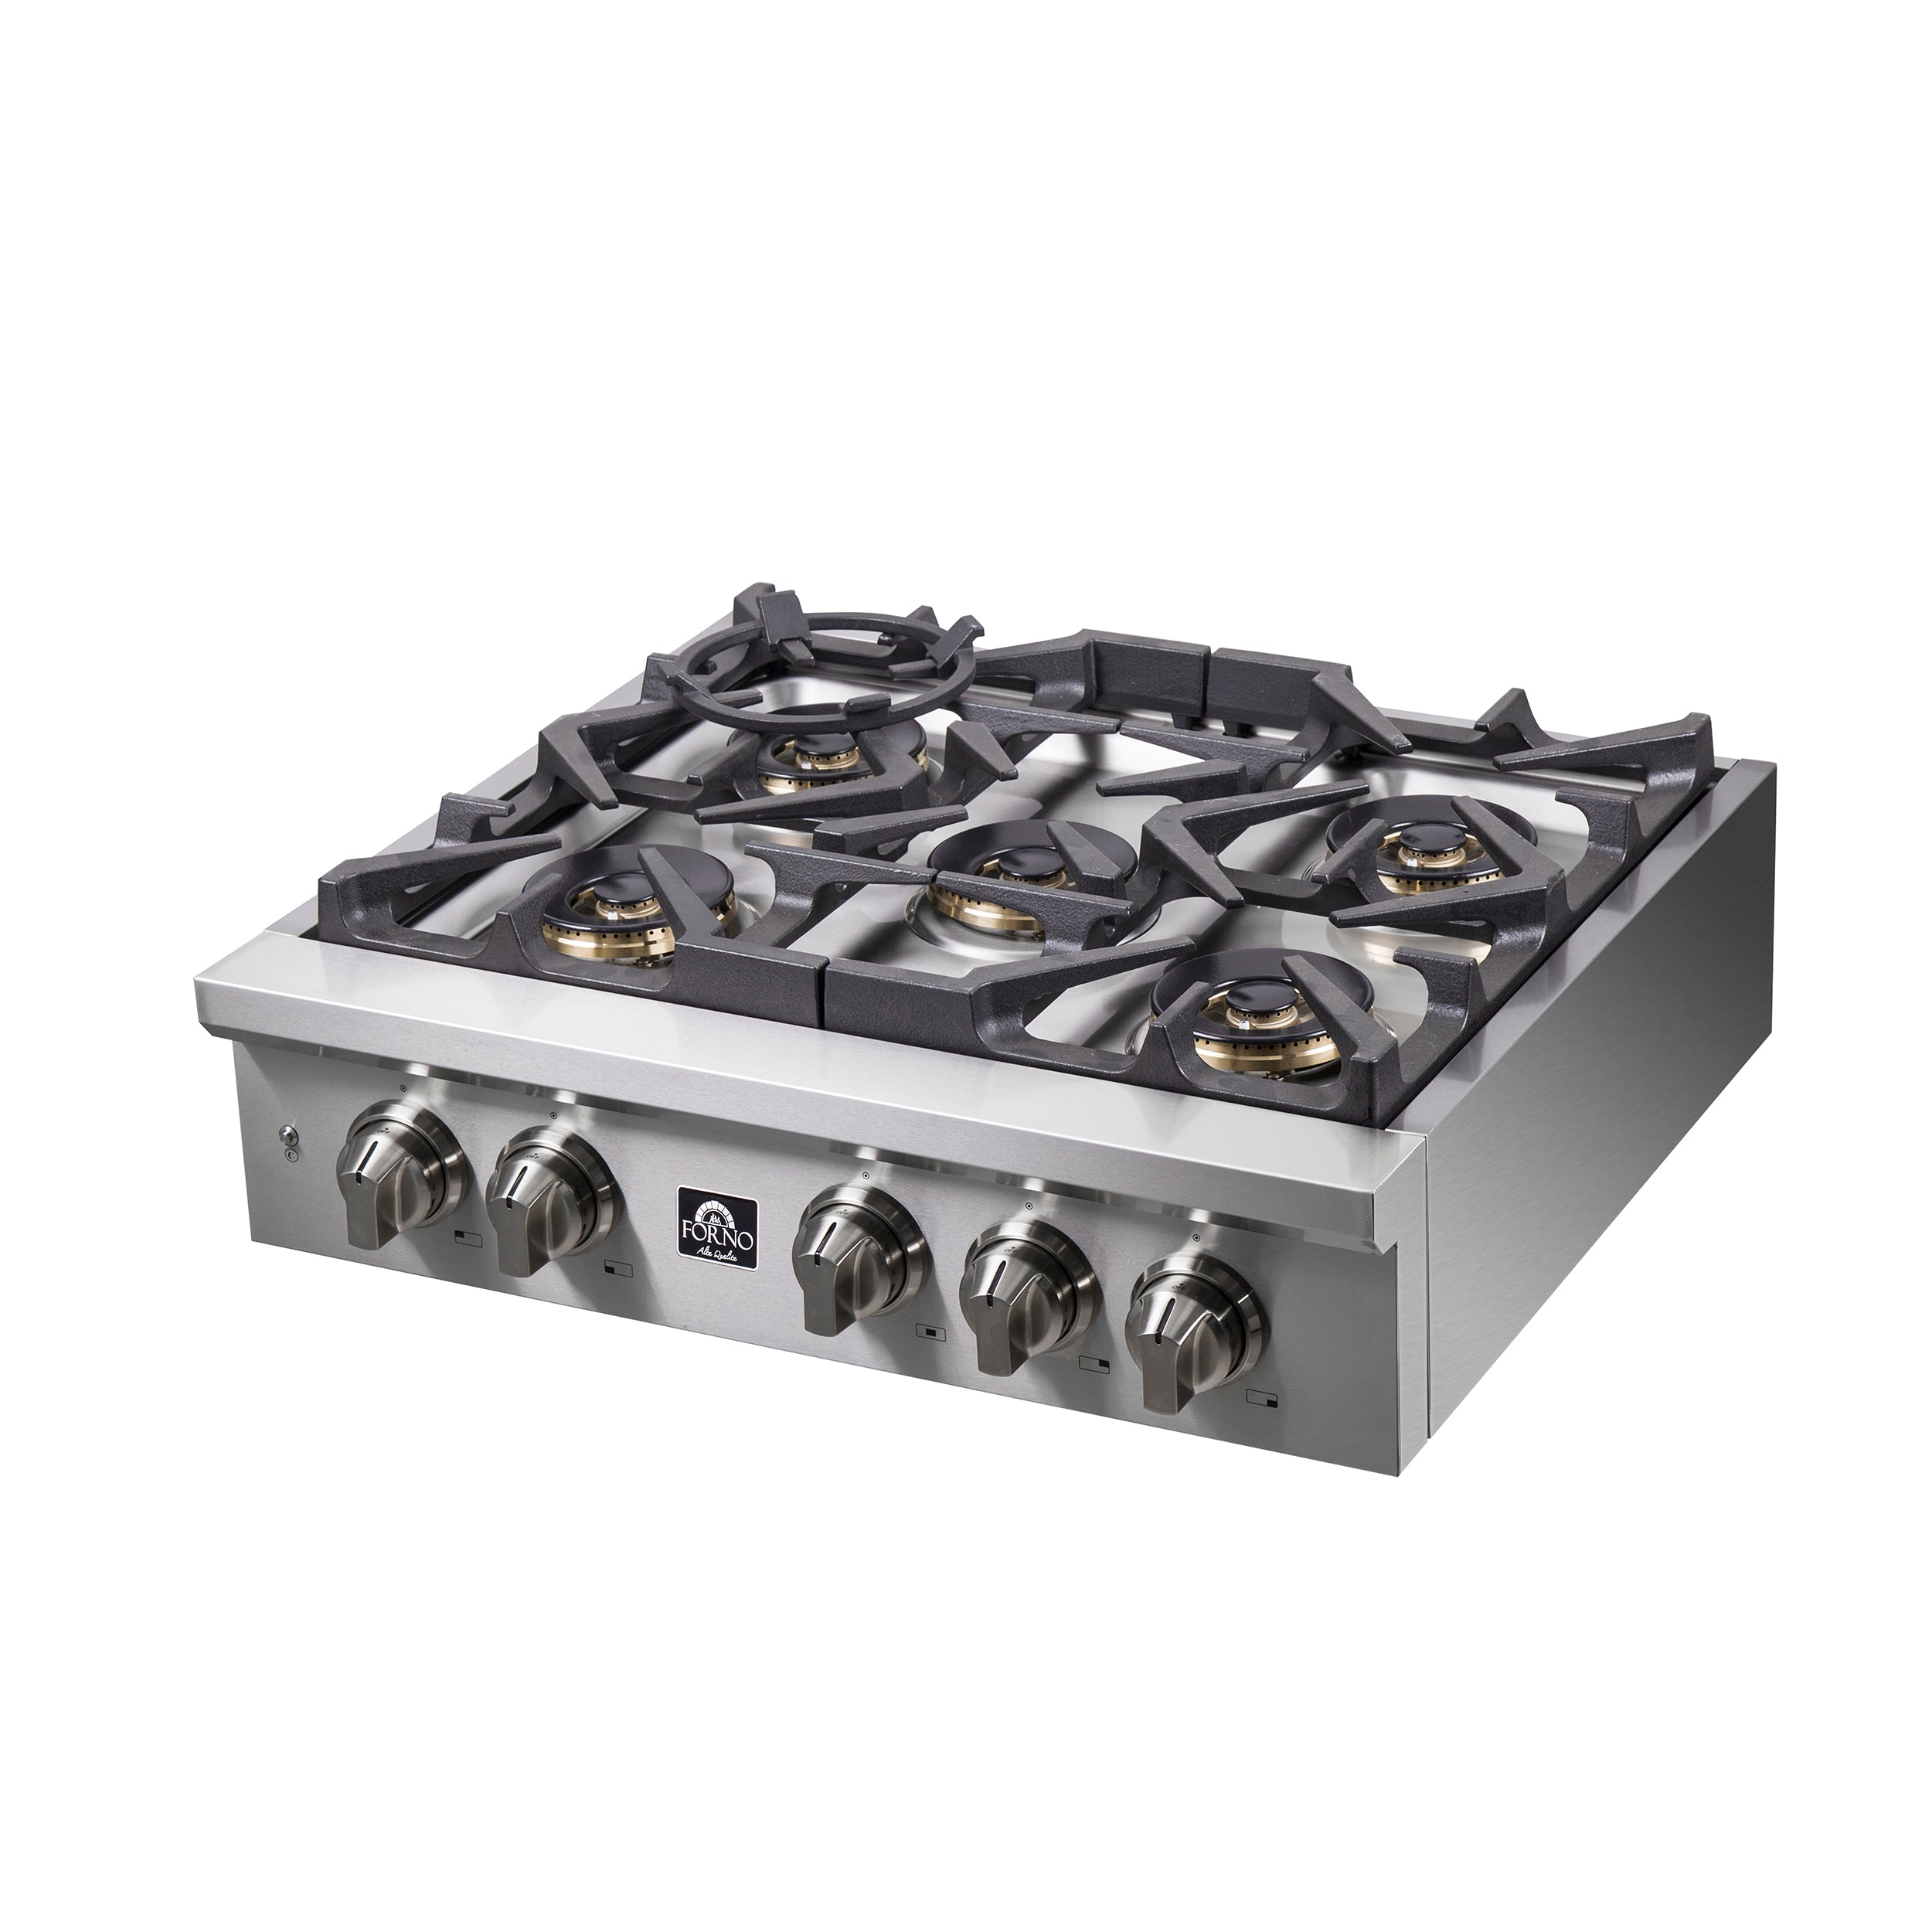 Forno Spezia 30 in. 5 Burner Gas Cooktop with Wok Ring and Griddle in Stainless Steel (FCTGS5751-30)